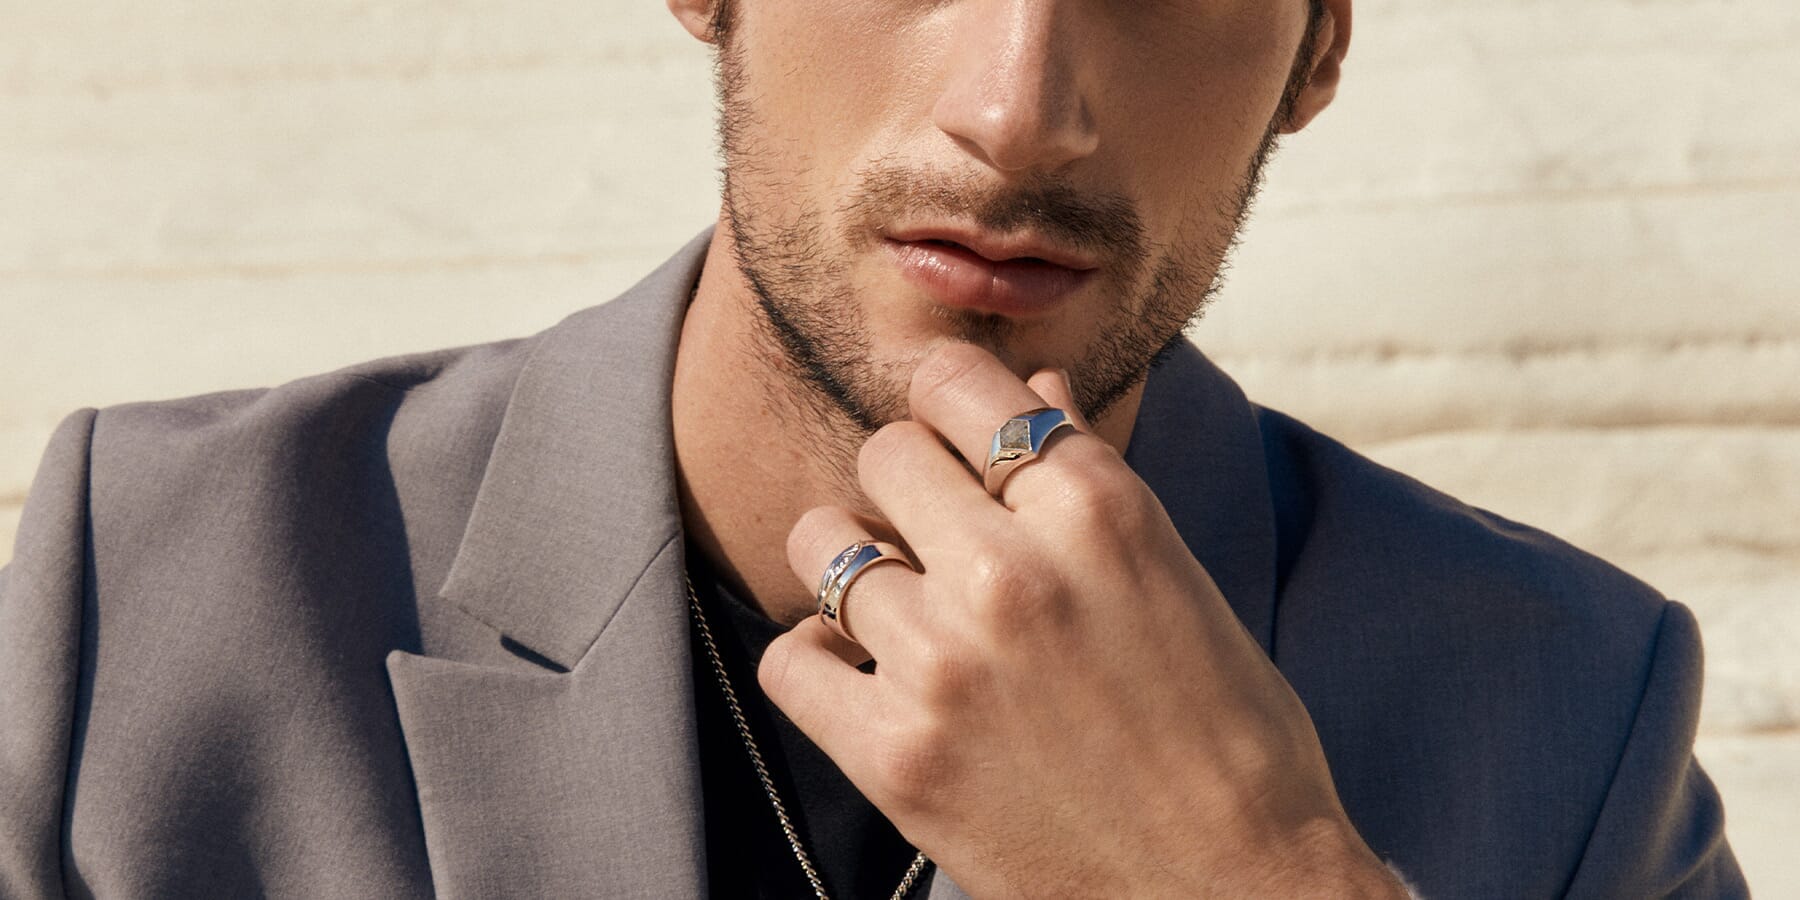 Guide on How to Wear Rings for Men - Unique Gift